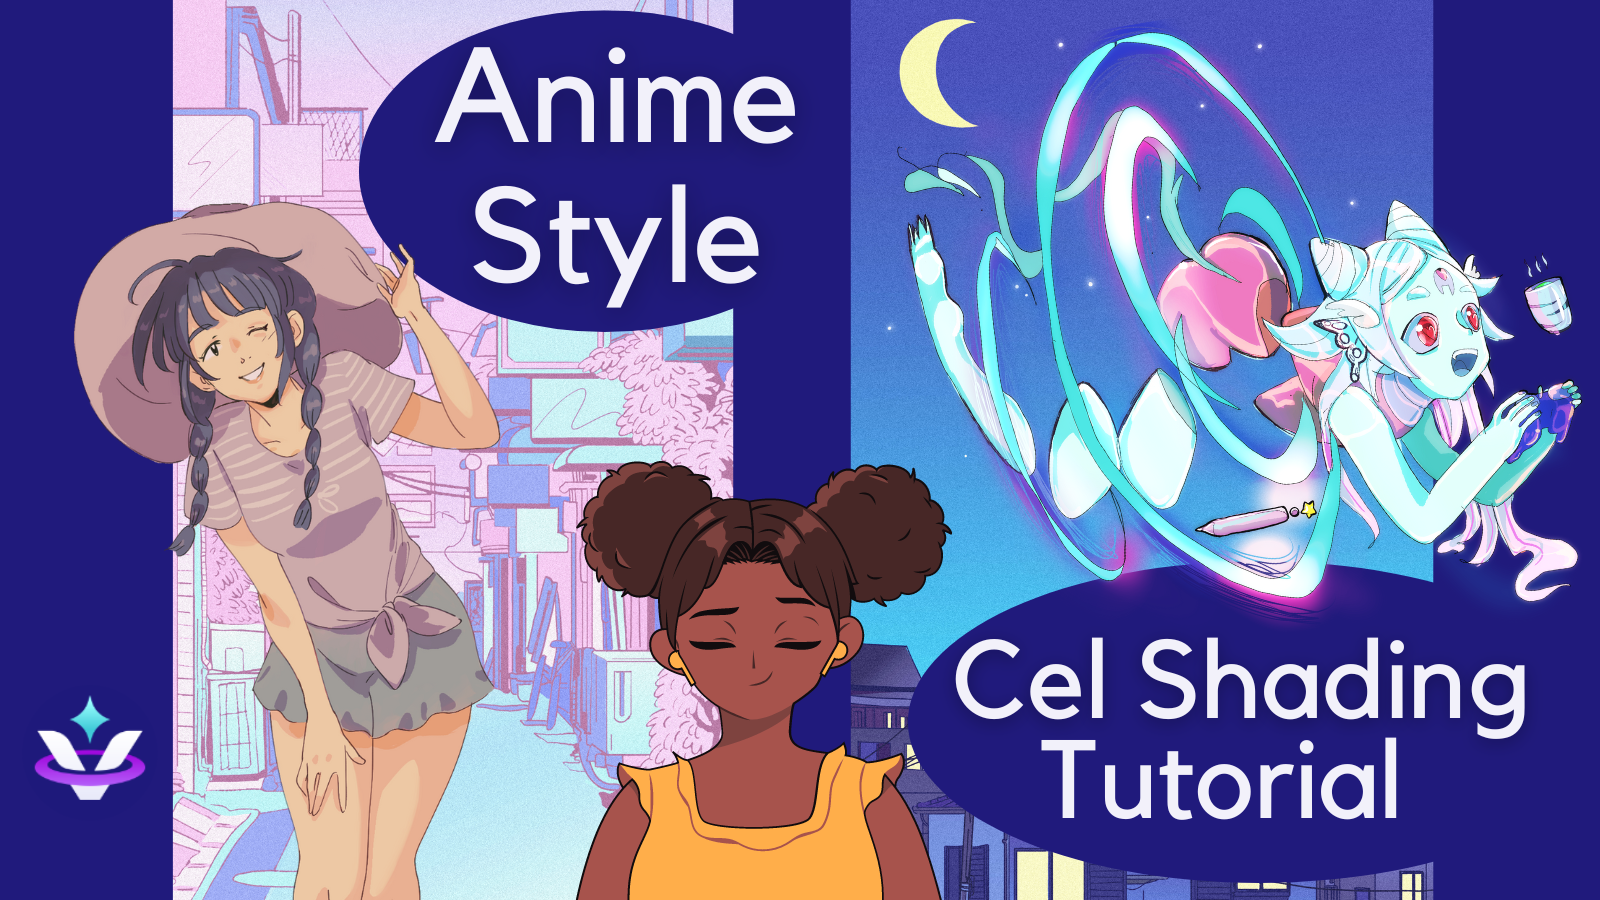 Drawing Advice: Anime Style Cel Shading Tutorial